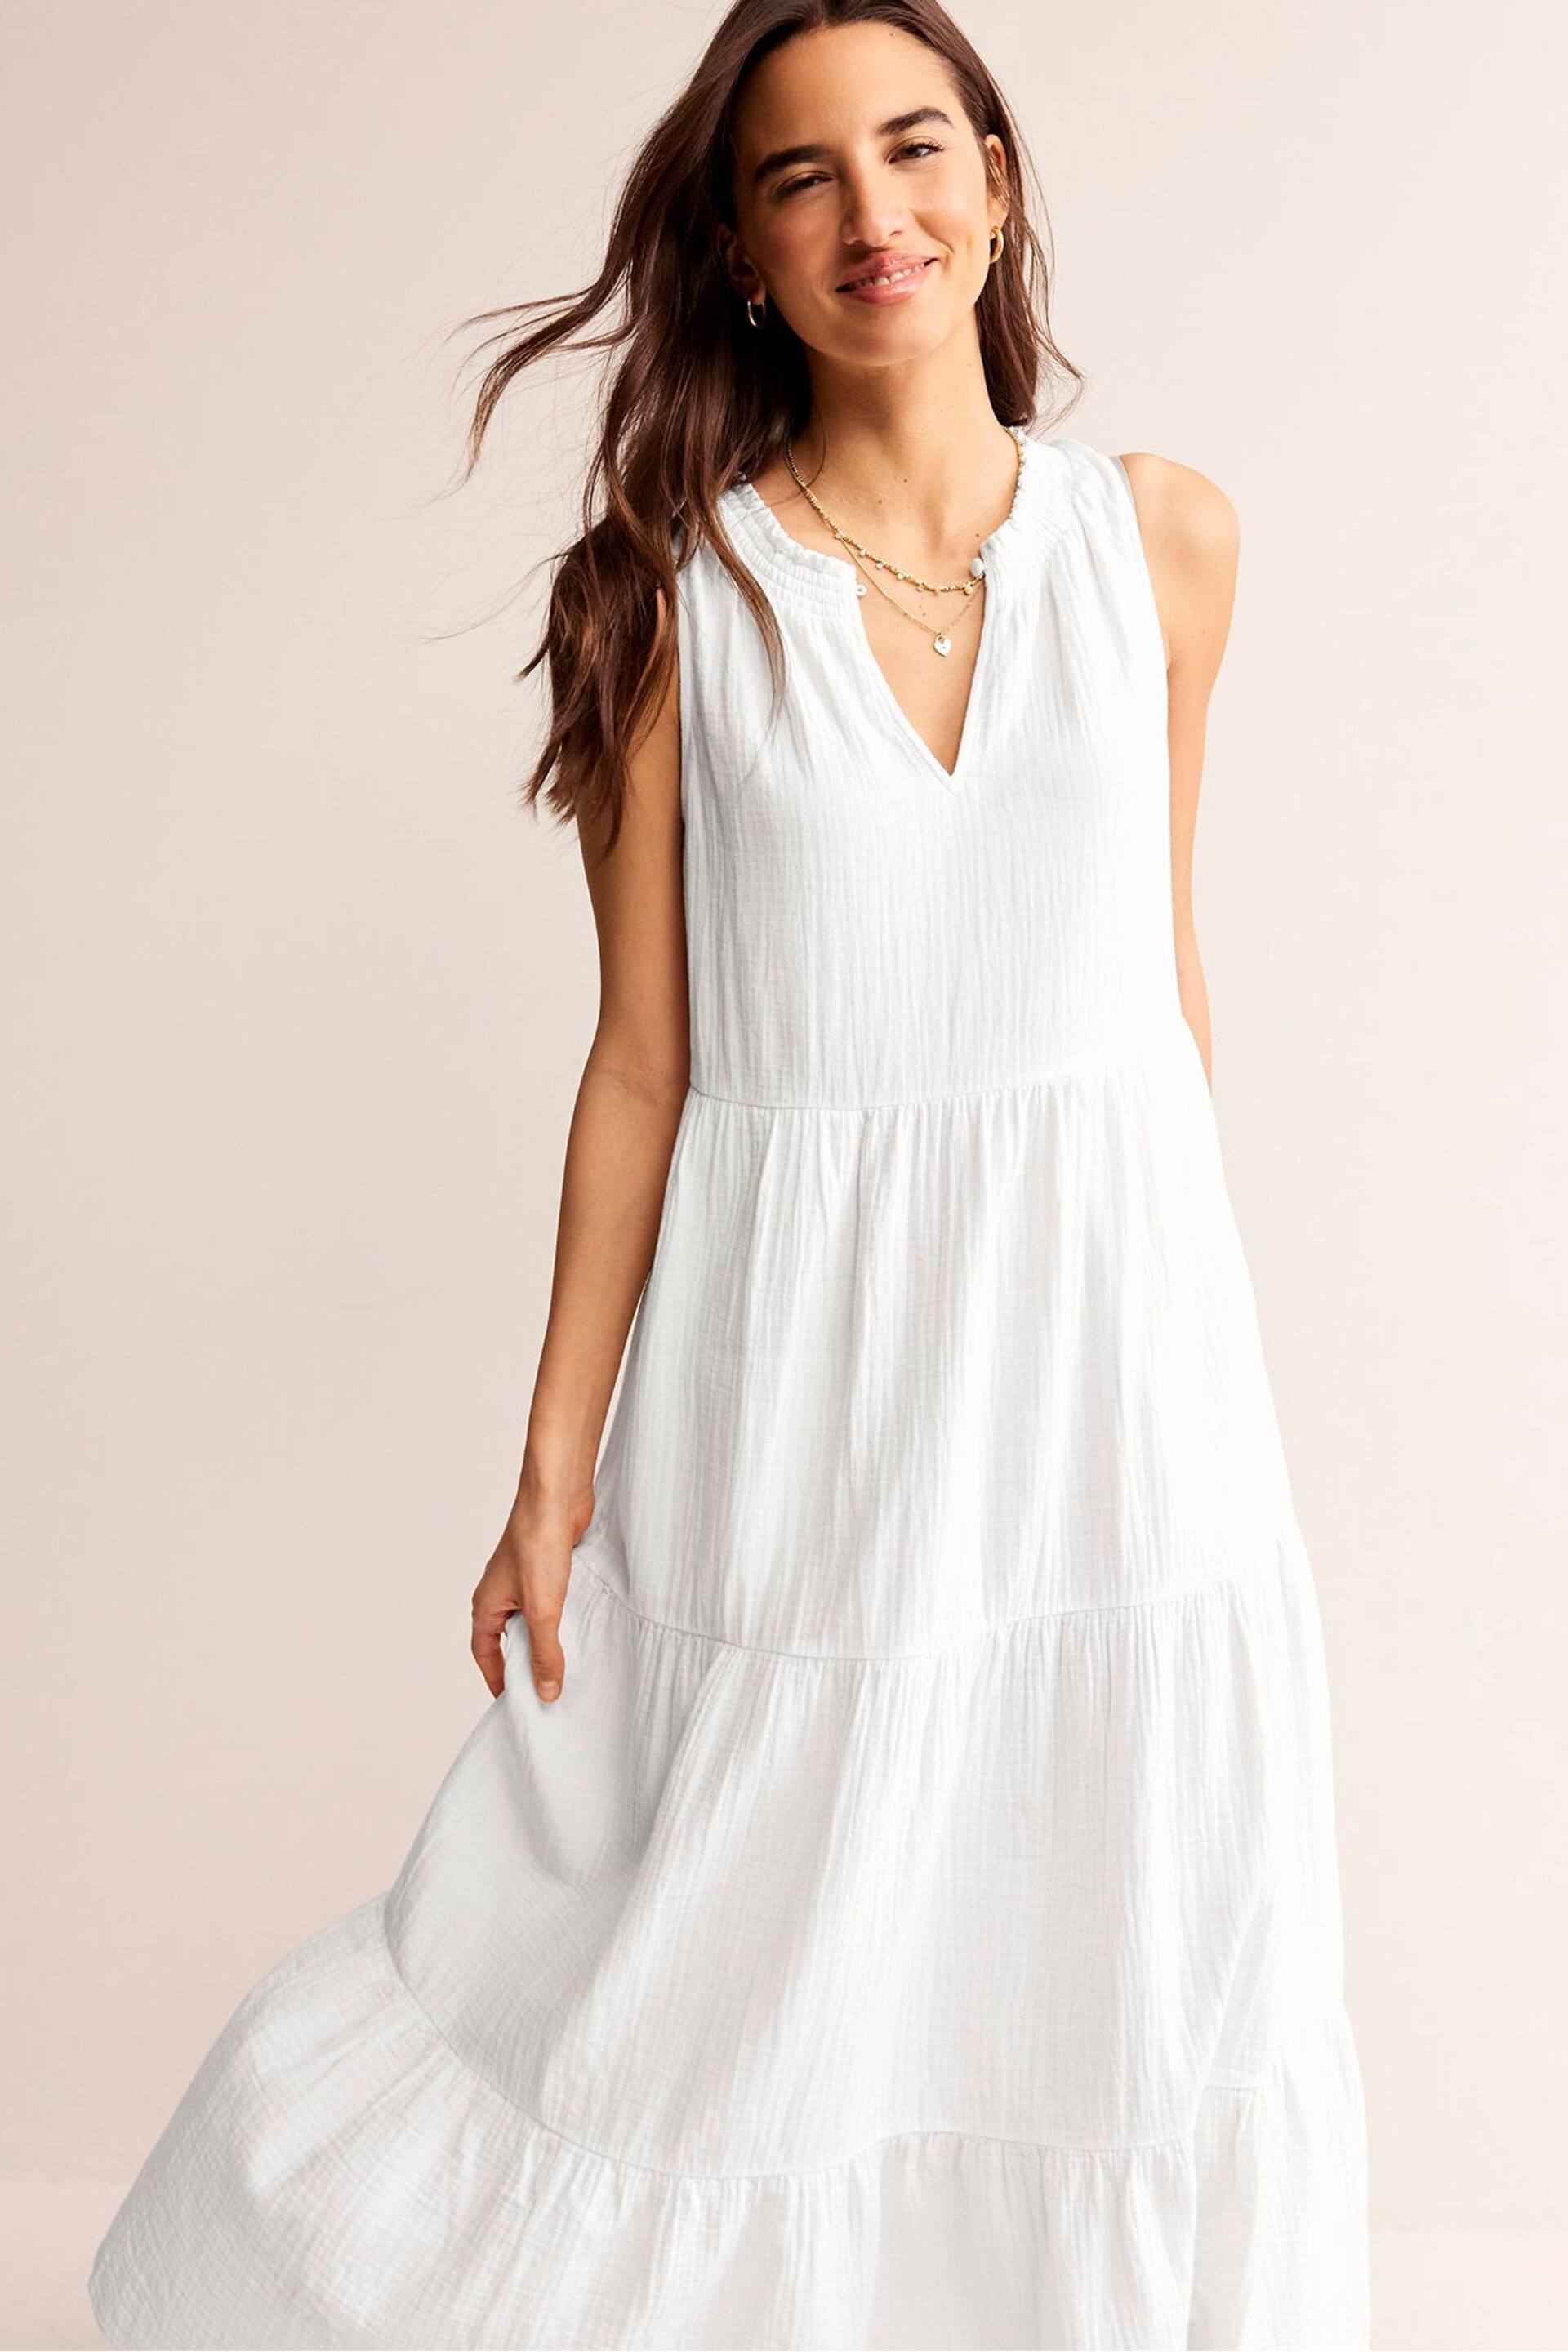 Boden White Double Cloth Maxi Tiered Dress - Image 1 of 6